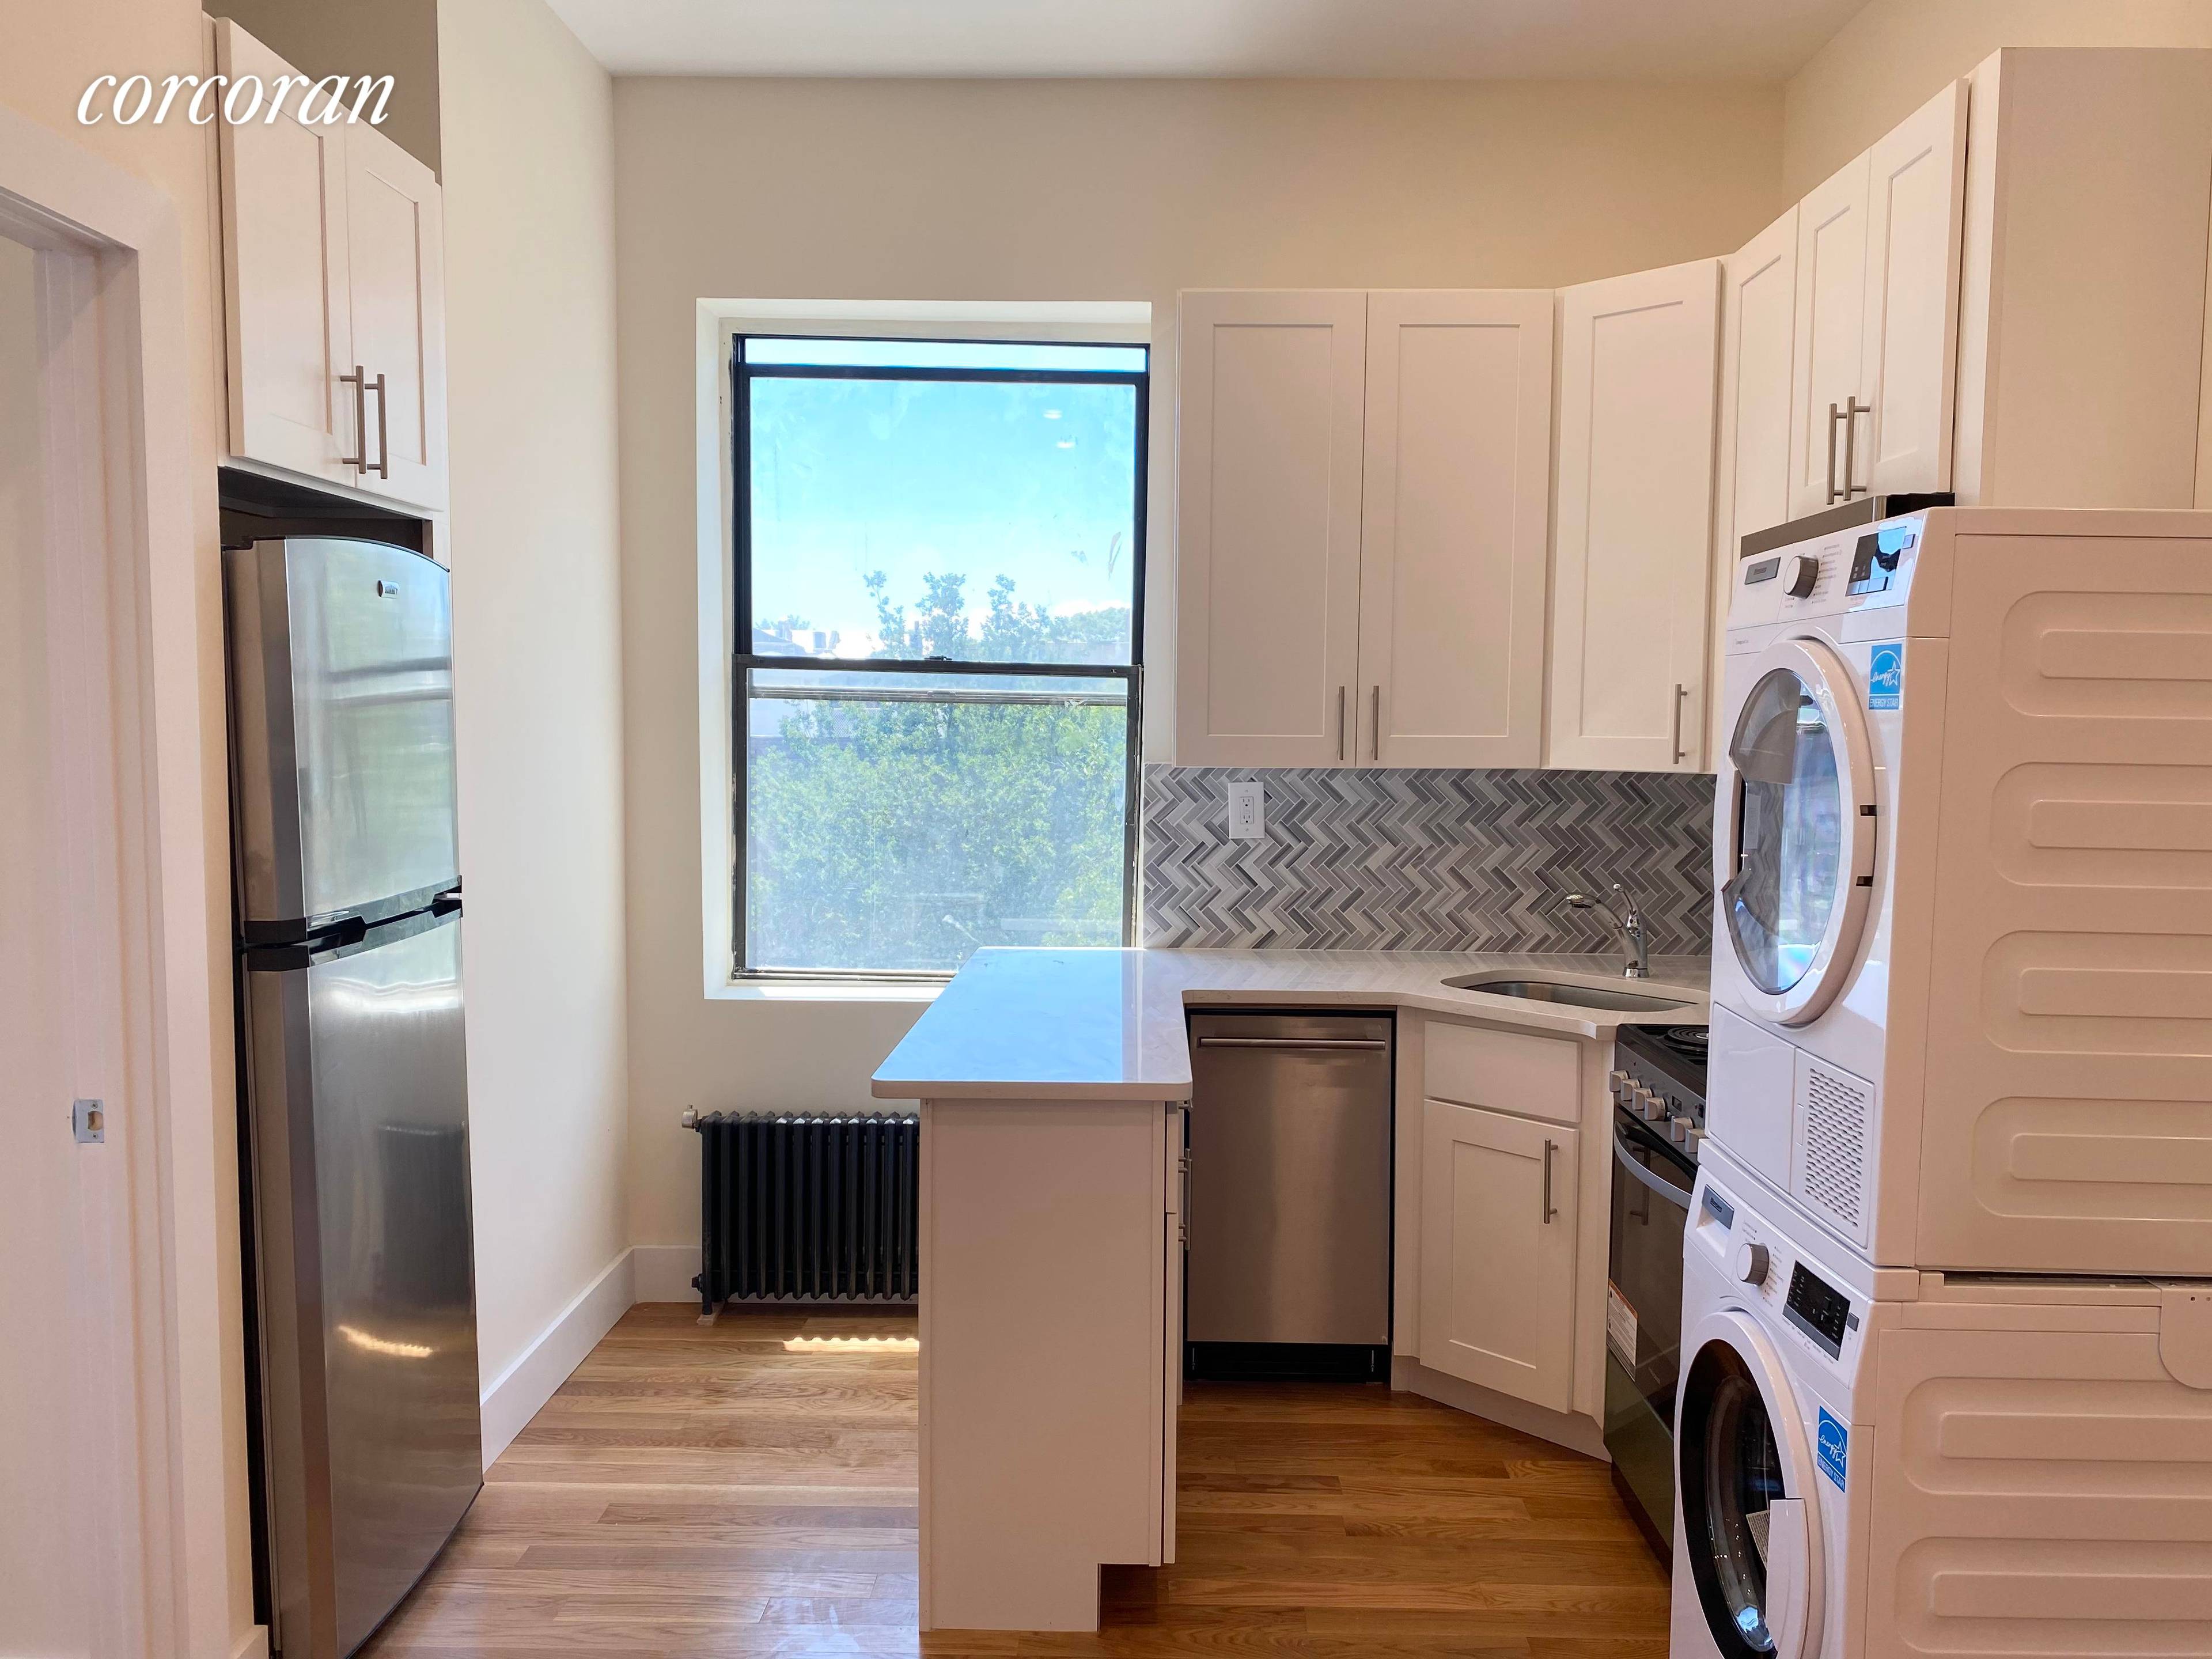 New and Available Now ! Newly renovated top floor apartment 3bed 1bath is the perfect place to call home.